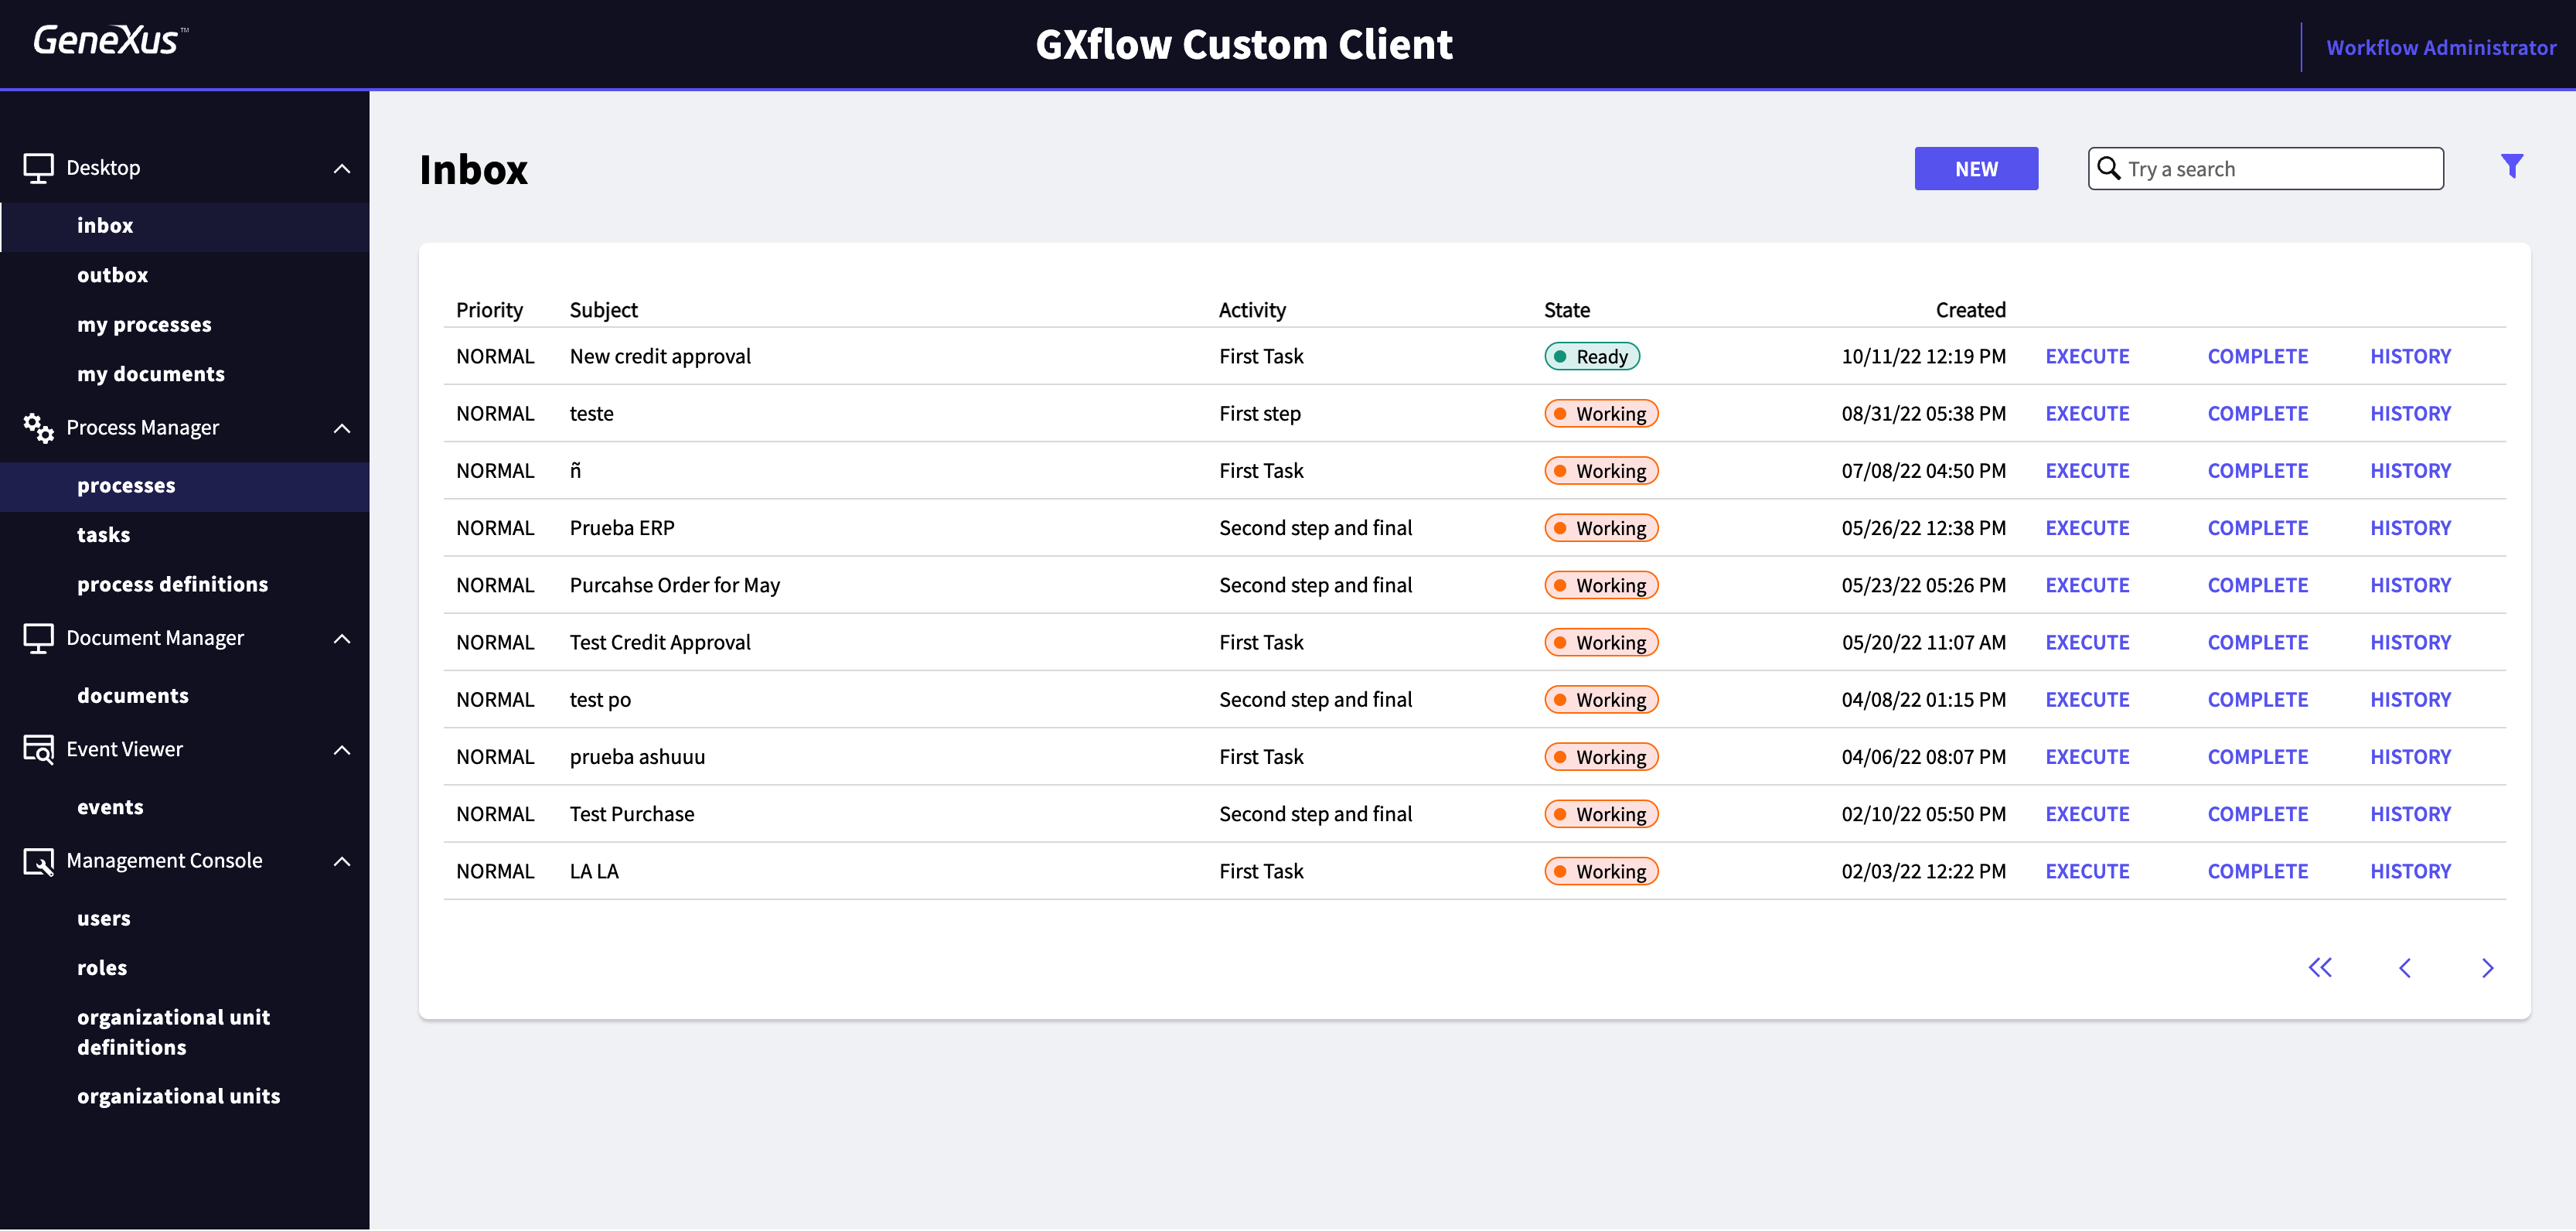 GXflow Custom Client based on Unanimo design system-CustomInbox